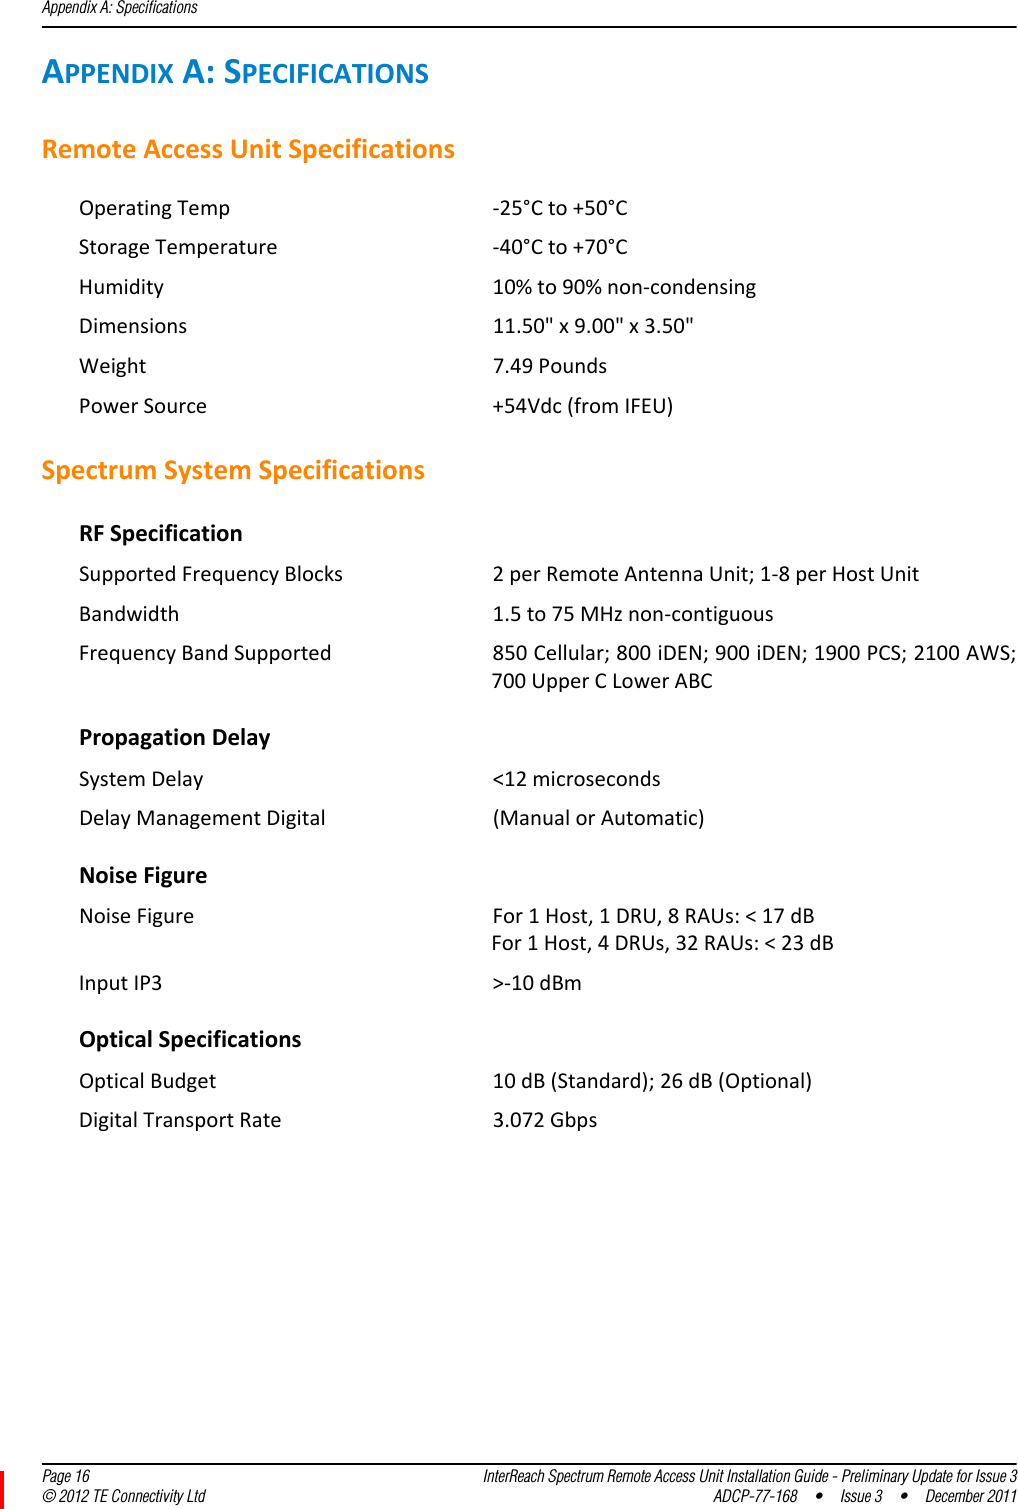 Appendix A: Specifications  Page 16 InterReach Spectrum Remote Access Unit Installation Guide - Preliminary Update for Issue 3© 2012 TE Connectivity Ltd ADCP-77-168 • Issue 3 • December 2011APPENDIXA:SPECIFICATIONSRemoteAccessUnitSpecificationsOperatingTemp ‐25°Cto+50°CStorageTemperature ‐40°Cto+70°CHumidity 10%to90%non‐condensingDimensions 11.50&quot;x9.00&quot;x3.50&quot;Weight 7.49PoundsPowerSource +54Vdc(fromIFEU)SpectrumSystemSpecificationsRFSpecificationSupportedFrequencyBlocks 2perRemoteAntennaUnit;1‐8perHostUnitBandwidth 1.5to75MHznon‐contiguousFrequencyBandSupported 850Cellular;800iDEN;900iDEN;1900PCS;2100AWS;700UpperCLowerABCPropagationDelaySystemDelay &lt;12microsecondsDelayManagementDigital (ManualorAutomatic)NoiseFigureNoiseFigure For1Host,1DRU,8RAUs:&lt;17dBFor1Host,4DRUs,32RAUs:&lt;23dBInputIP3 &gt;‐10dBmOpticalSpecificationsOpticalBudget 10dB(Standard);26dB(Optional)DigitalTransportRate 3.072Gbps